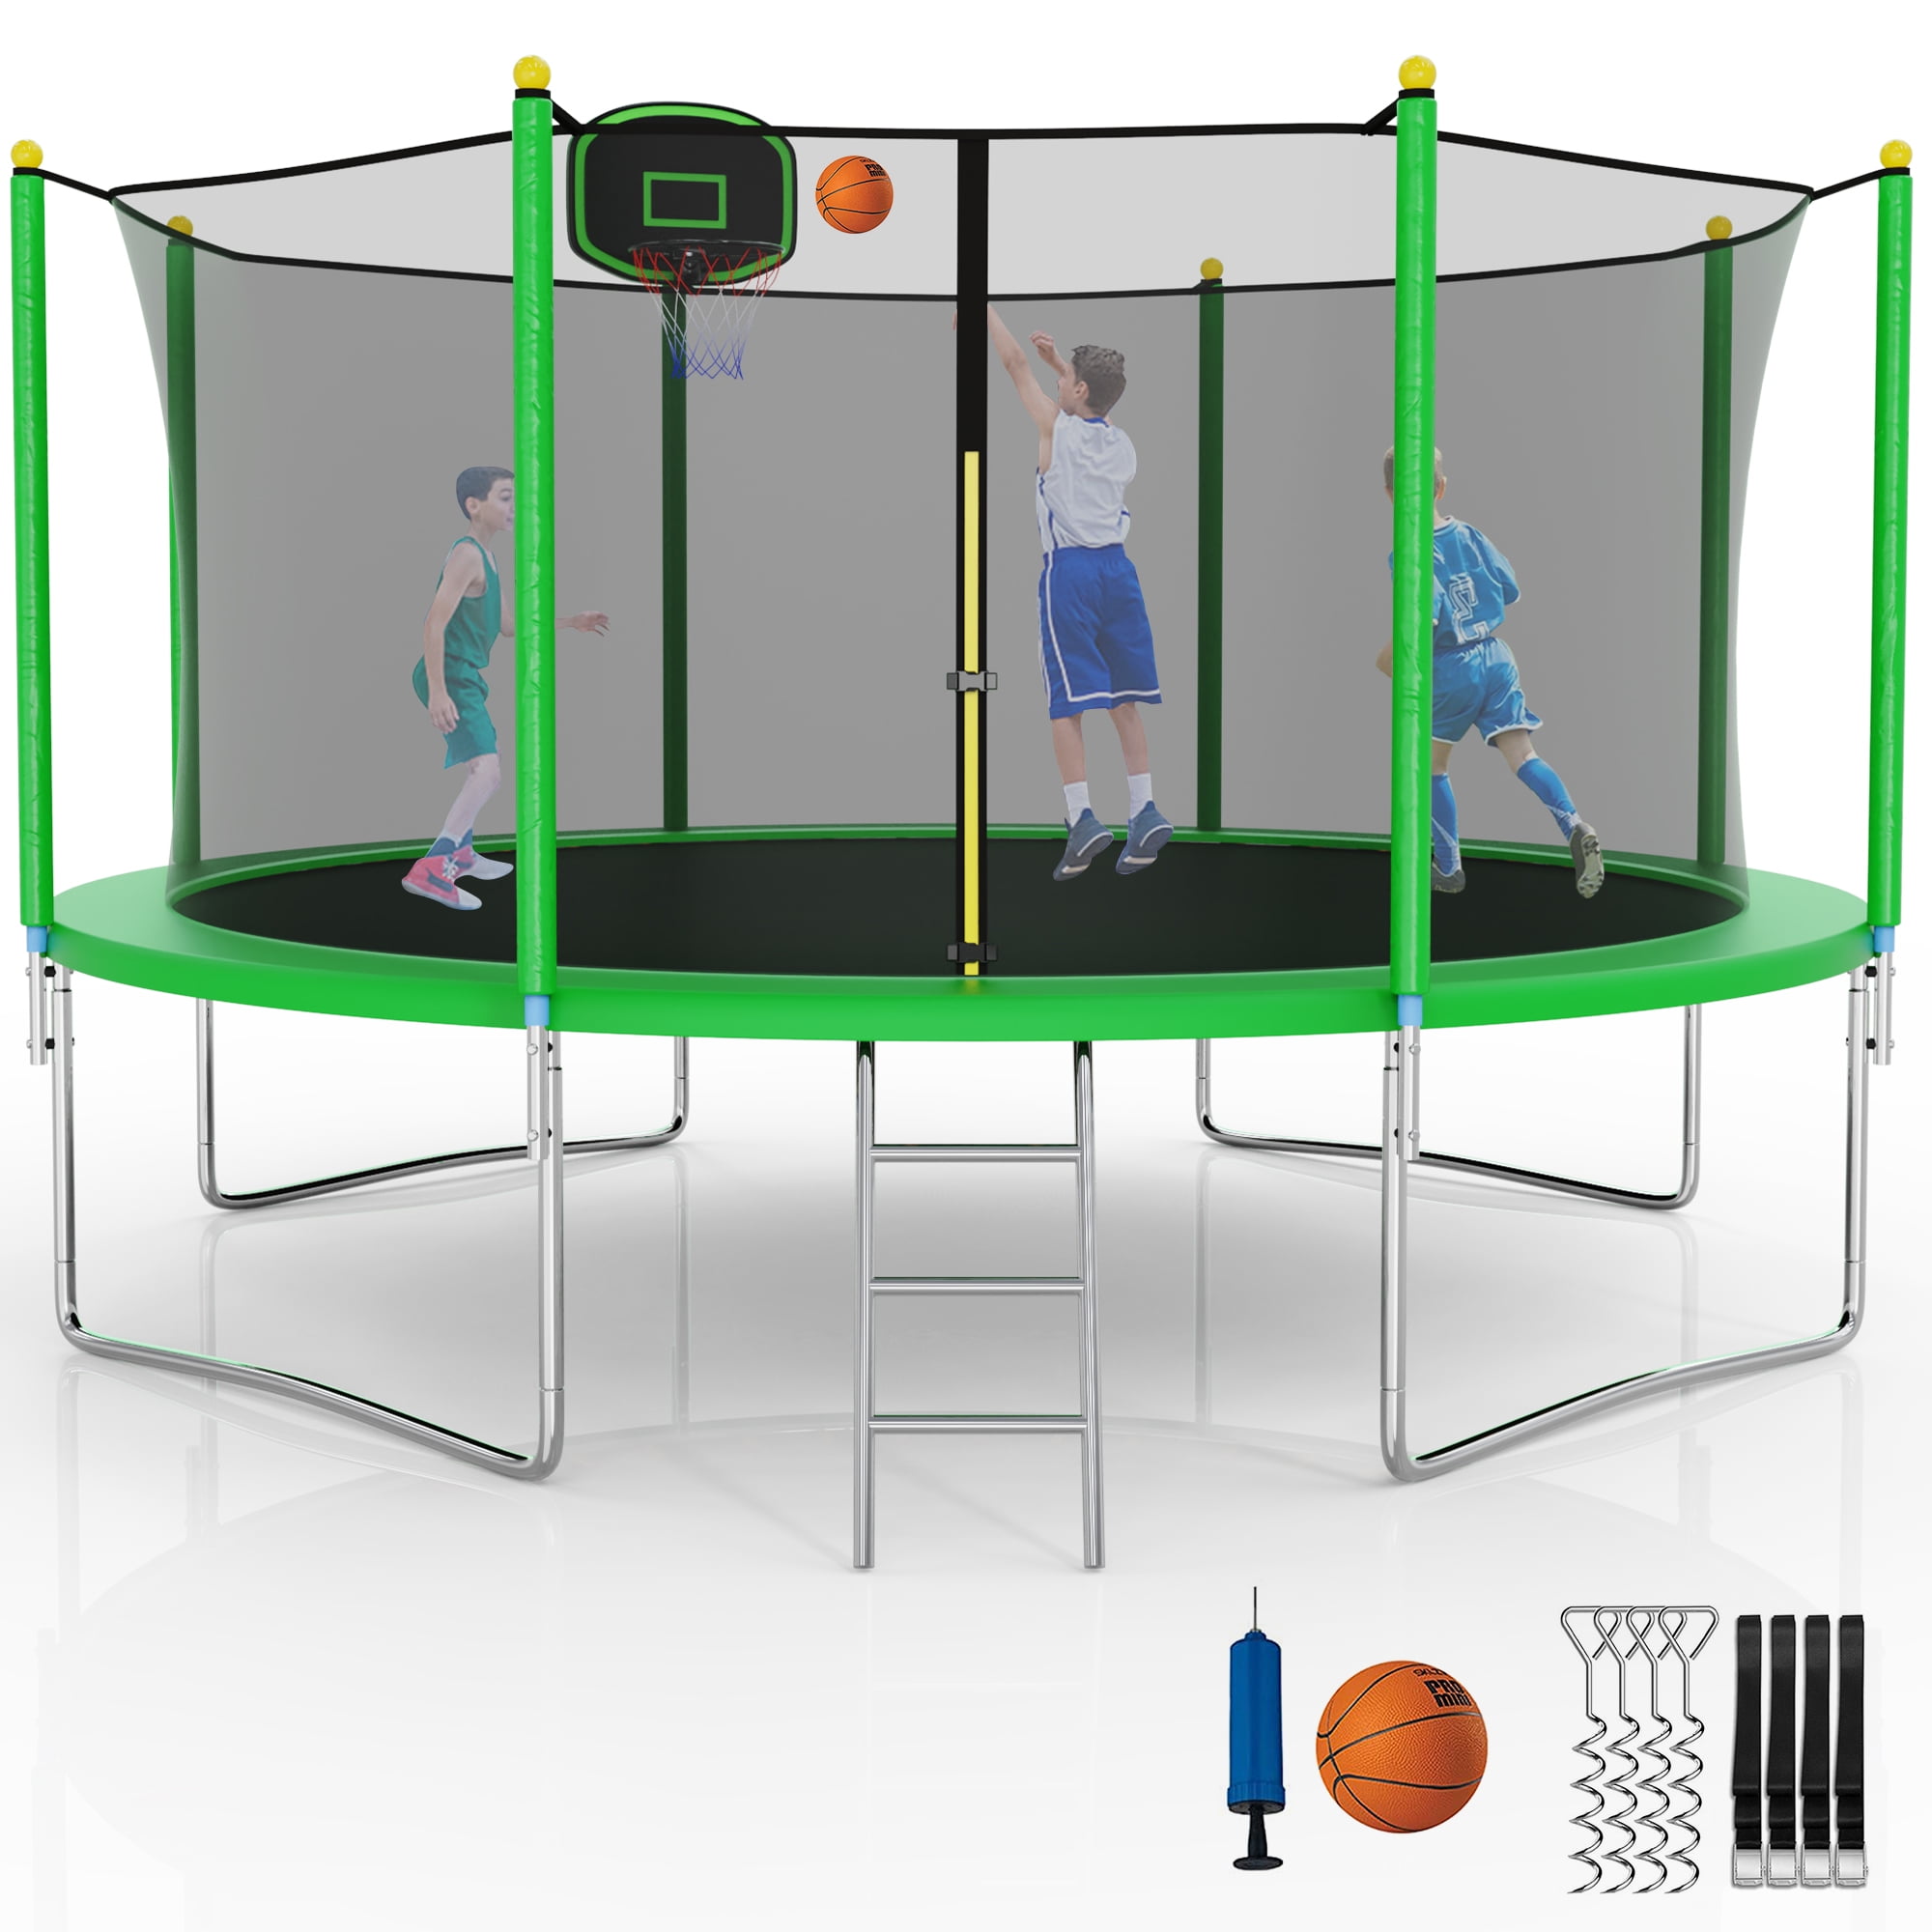 ASTM CPC Approved Large Tranpoline with Basketball Hoop Rubber Ball XMIKA 1400LBS 14FT Tranpoline for Adults Outdoor Tranpoline Capacity 6-9 Kids Backyard Tranpoline 